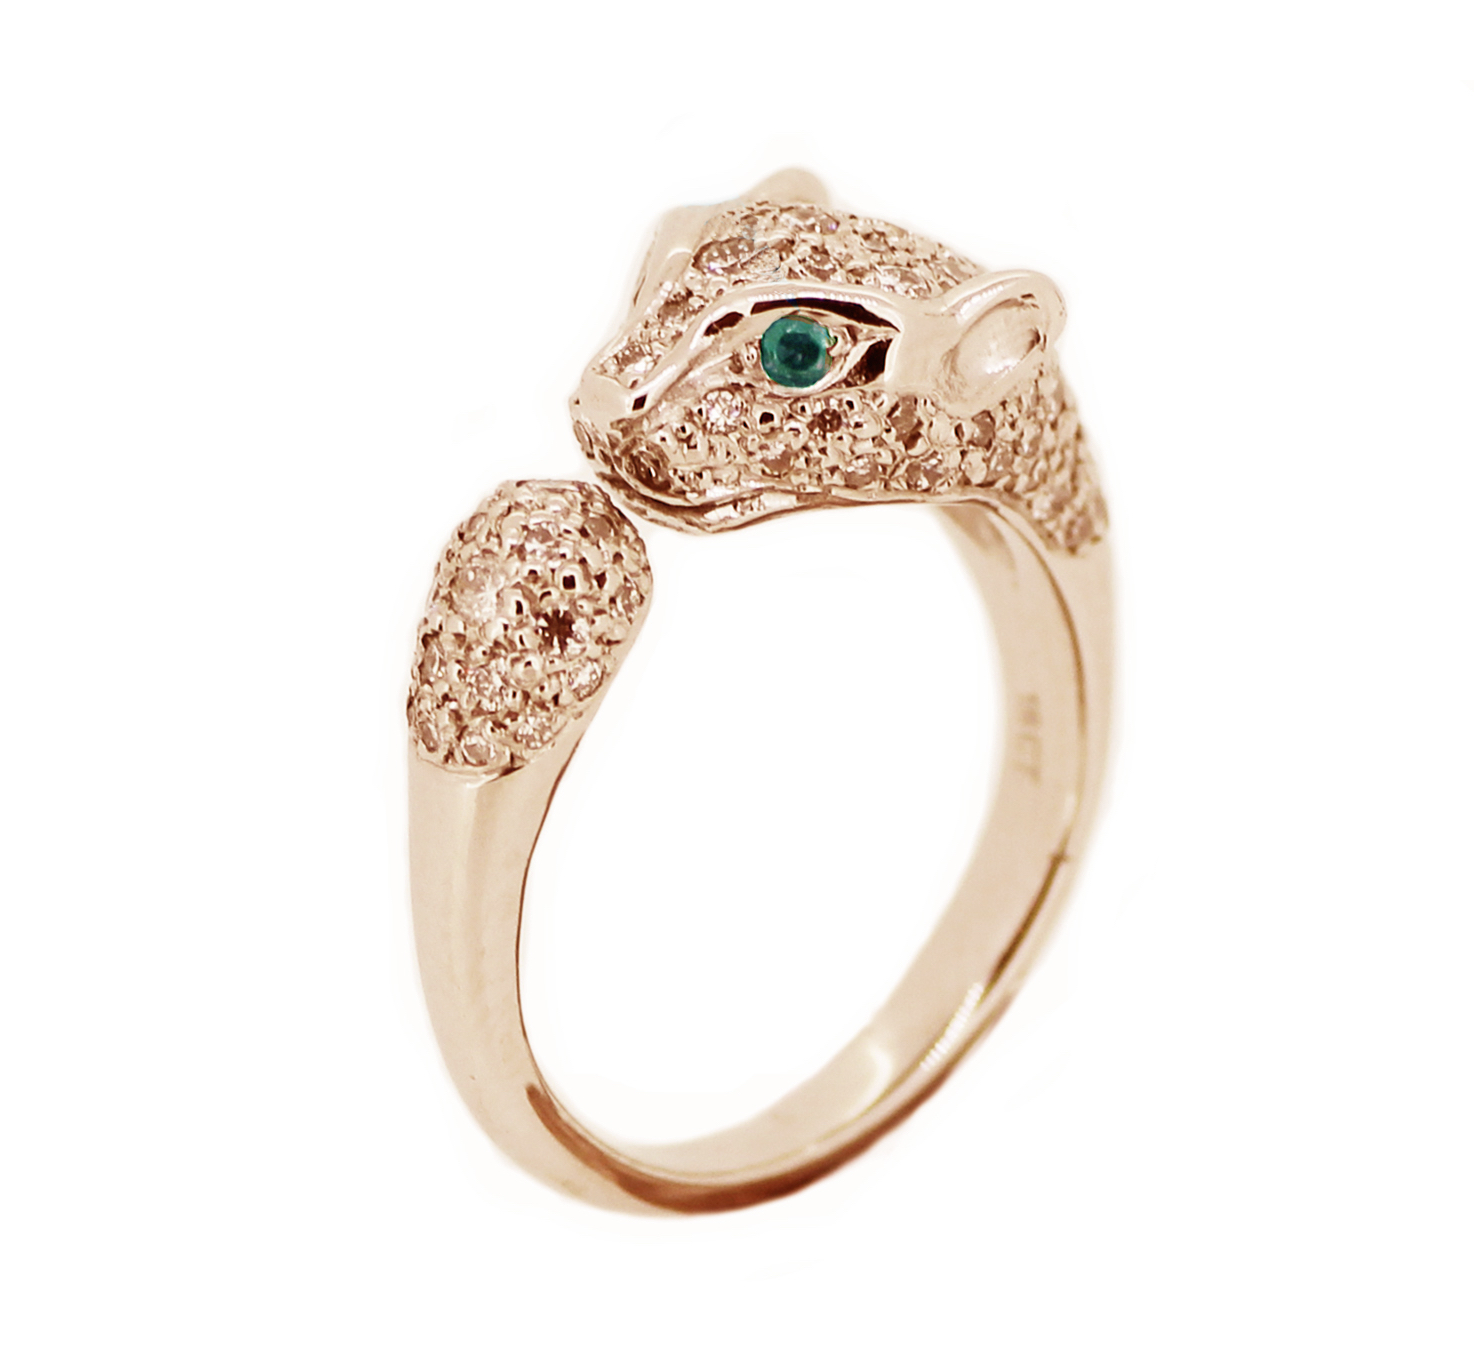 Lioness Ring Rose Gold and Champagne Diamonds with Emerald Eyes.jpg